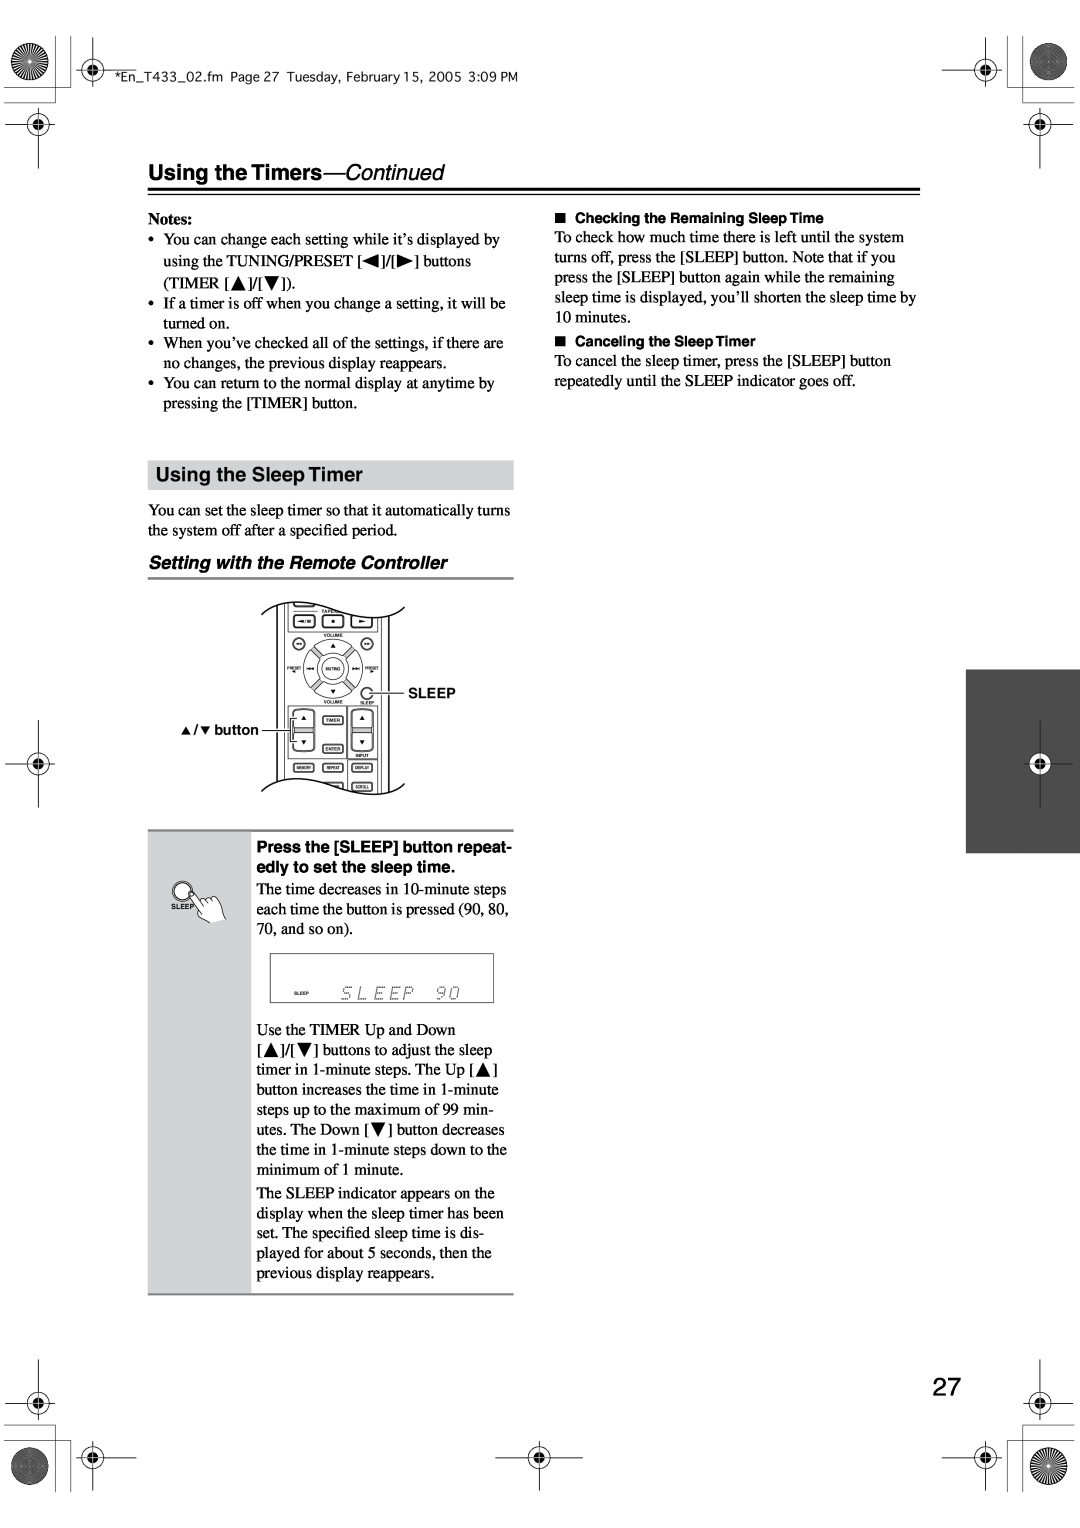 Onkyo T-433 instruction manual Using the Sleep Timer, Setting with the Remote Controller, Using the Timers-Continued 